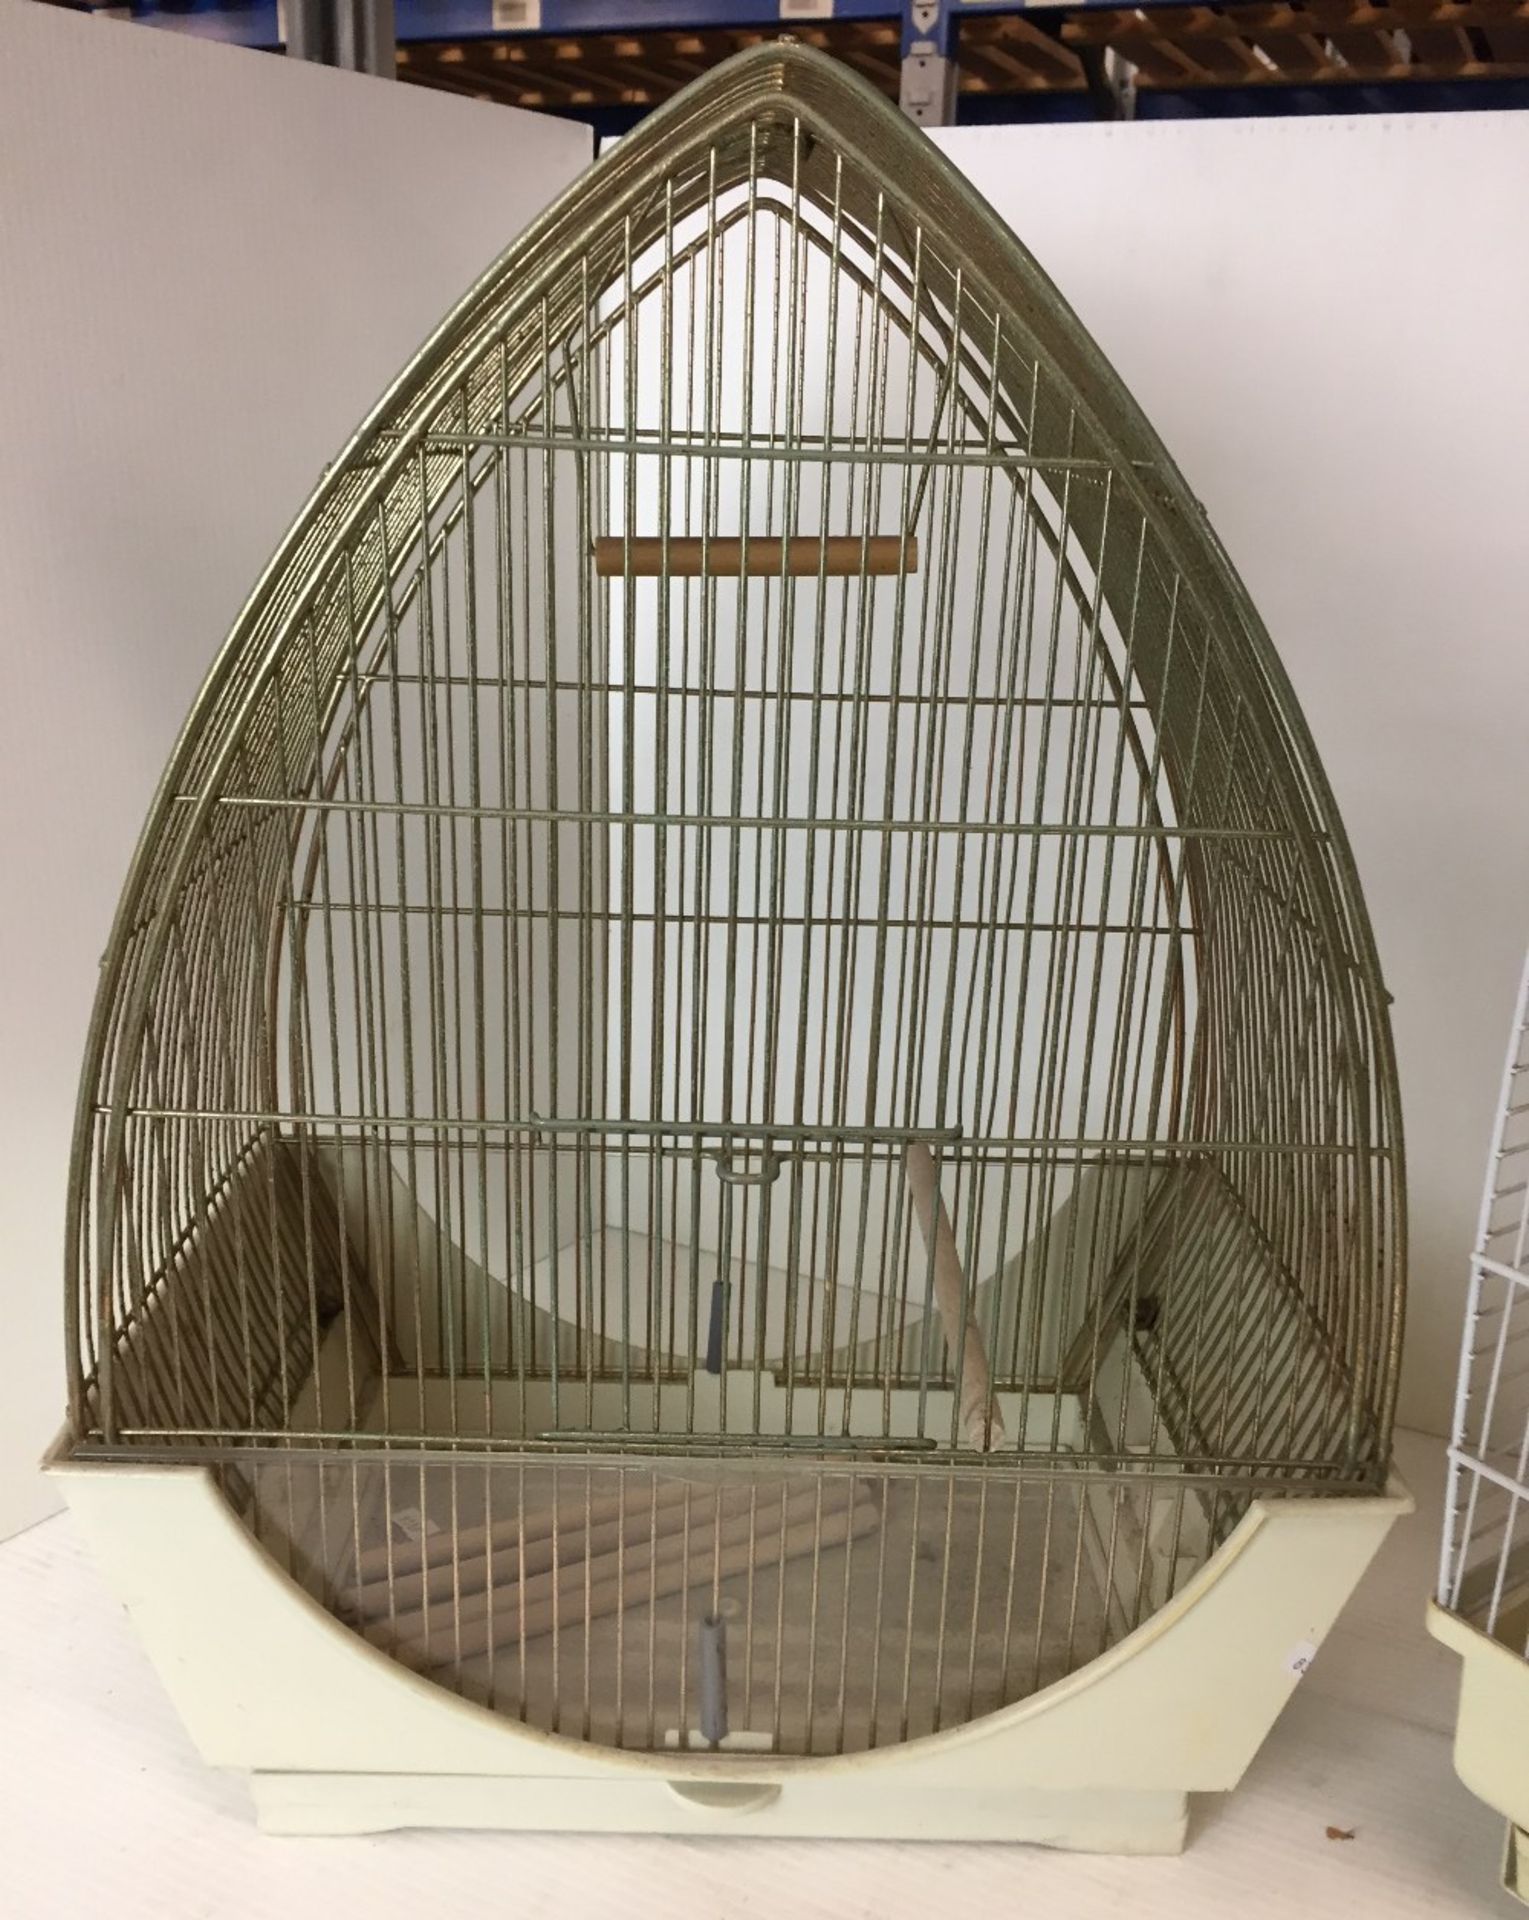 Two bird cages - one 51 x 29 x 48cm high and the other 40 max x 25 x 52cm high and bird cage - Image 3 of 4